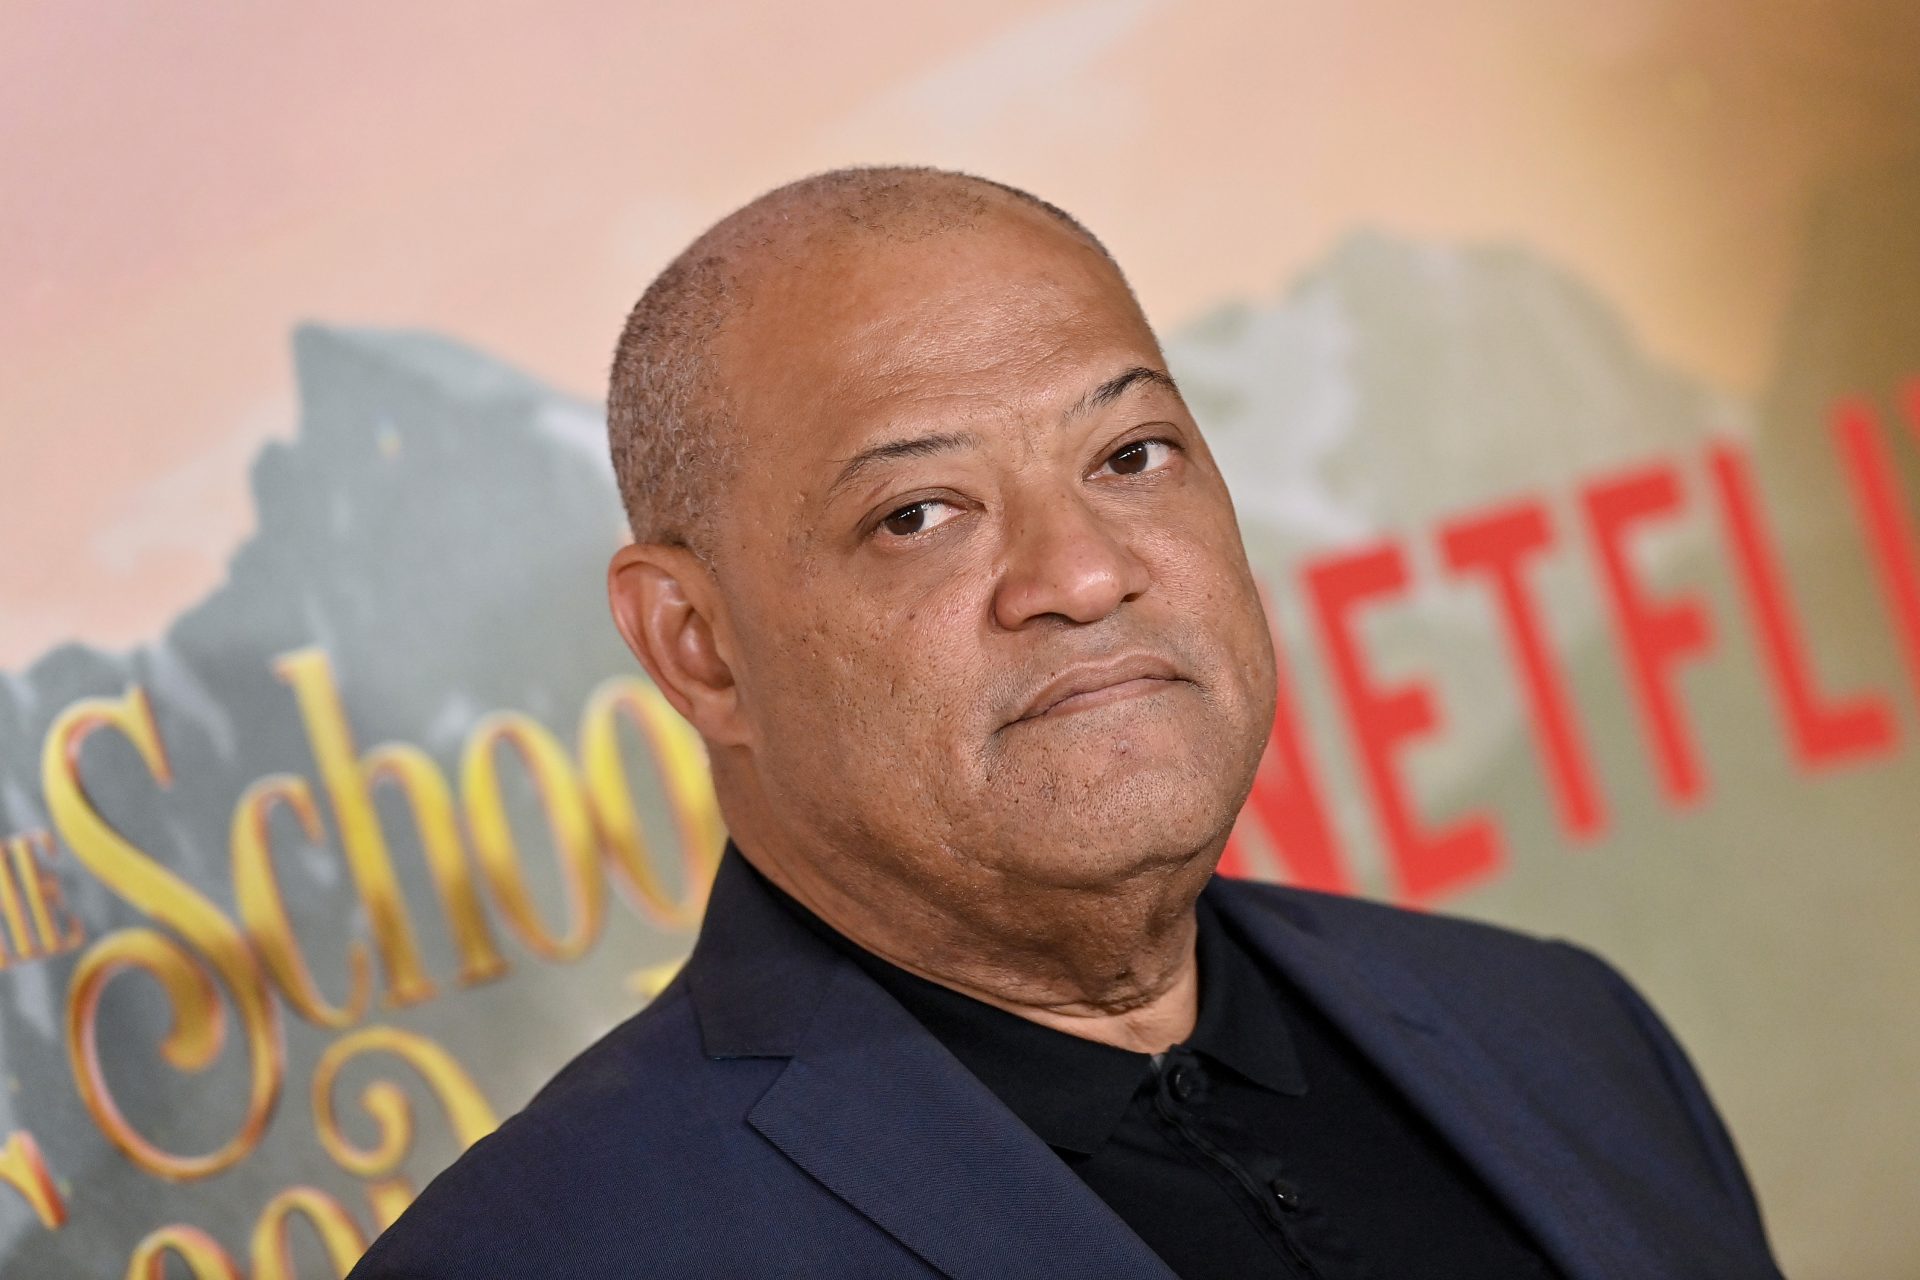 Laurence Fishburne Reveals He Was ‘Abusive’ During First Marriage, Worked On Anger In Therapy